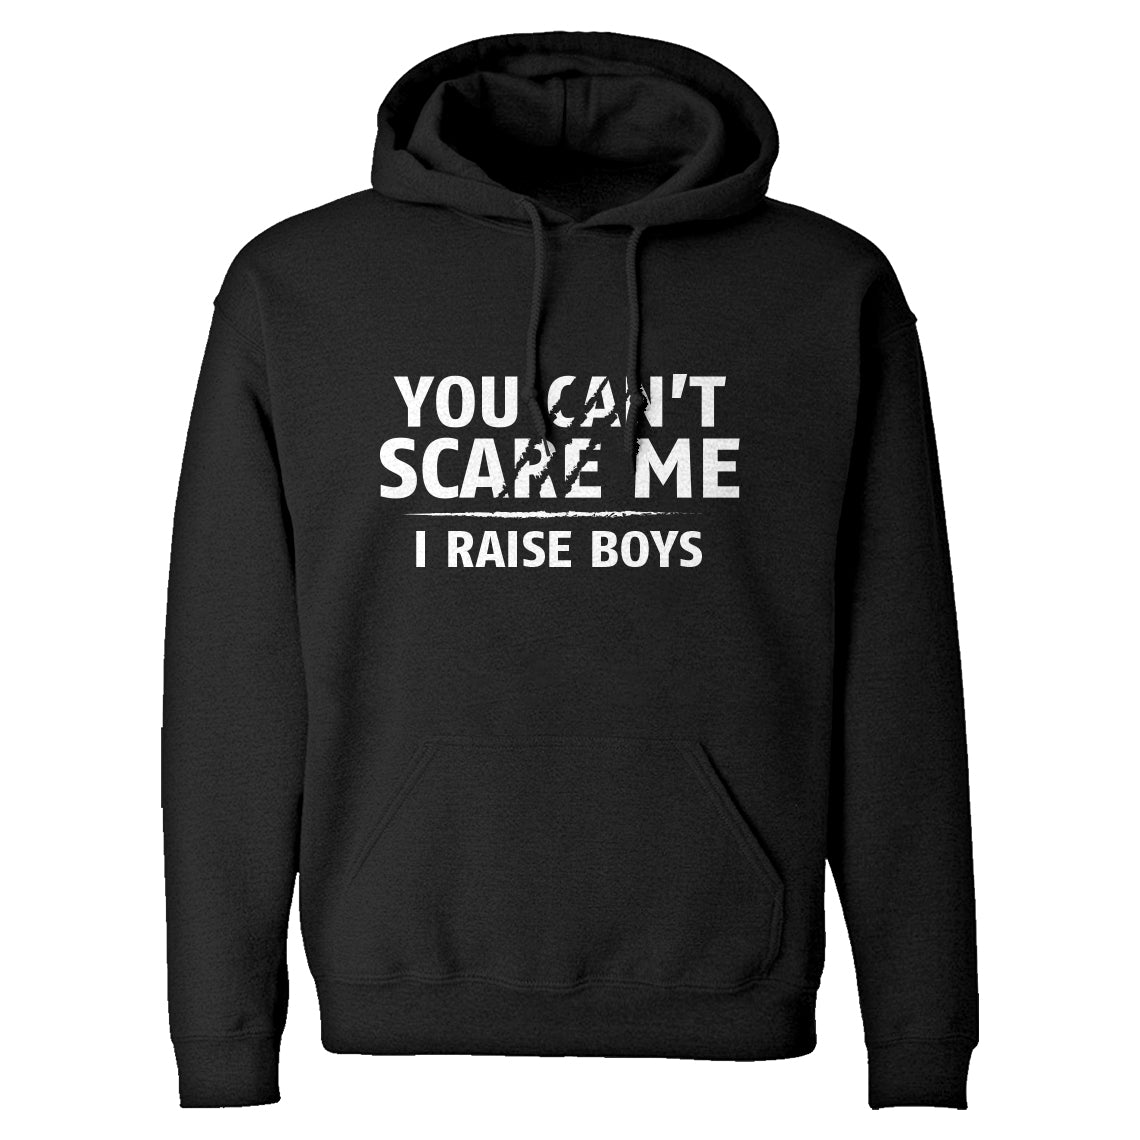 You Can't Scare Me I Raise Boys Unisex Adult Hoodie